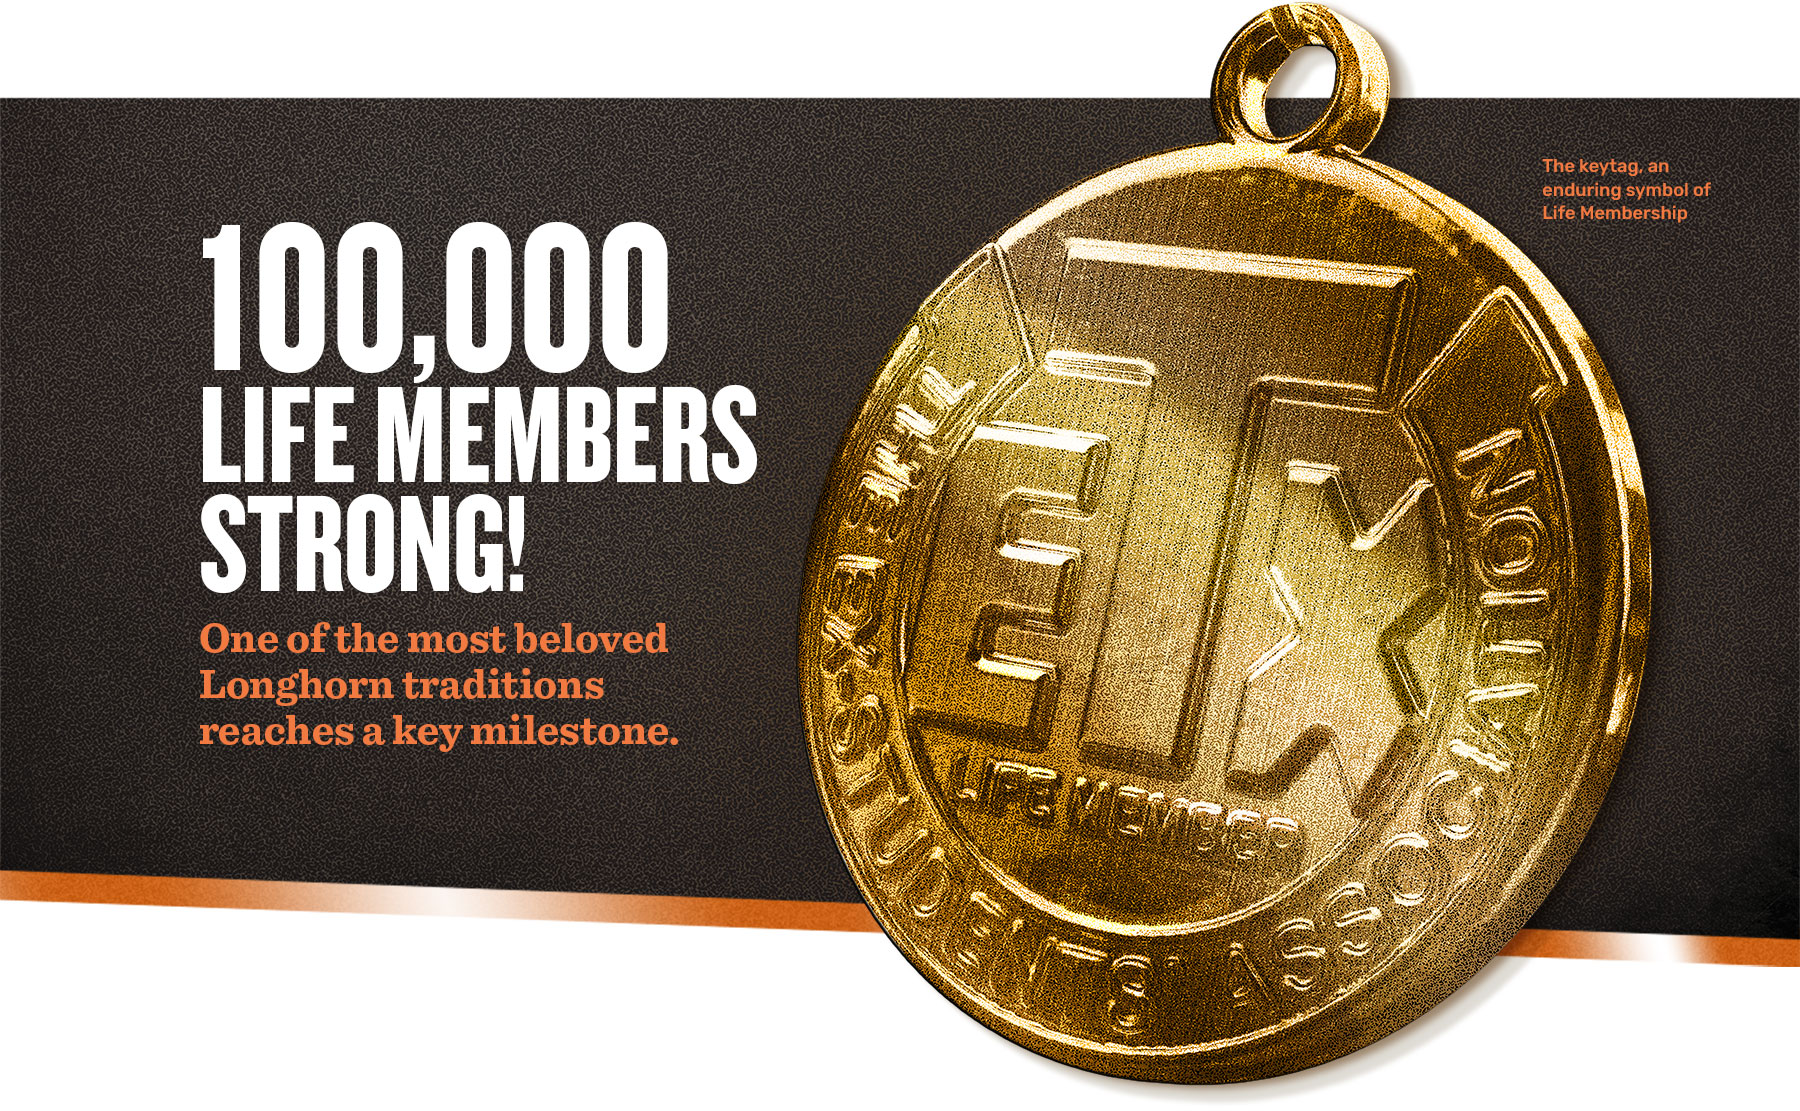 100,000 Life Members Strong!